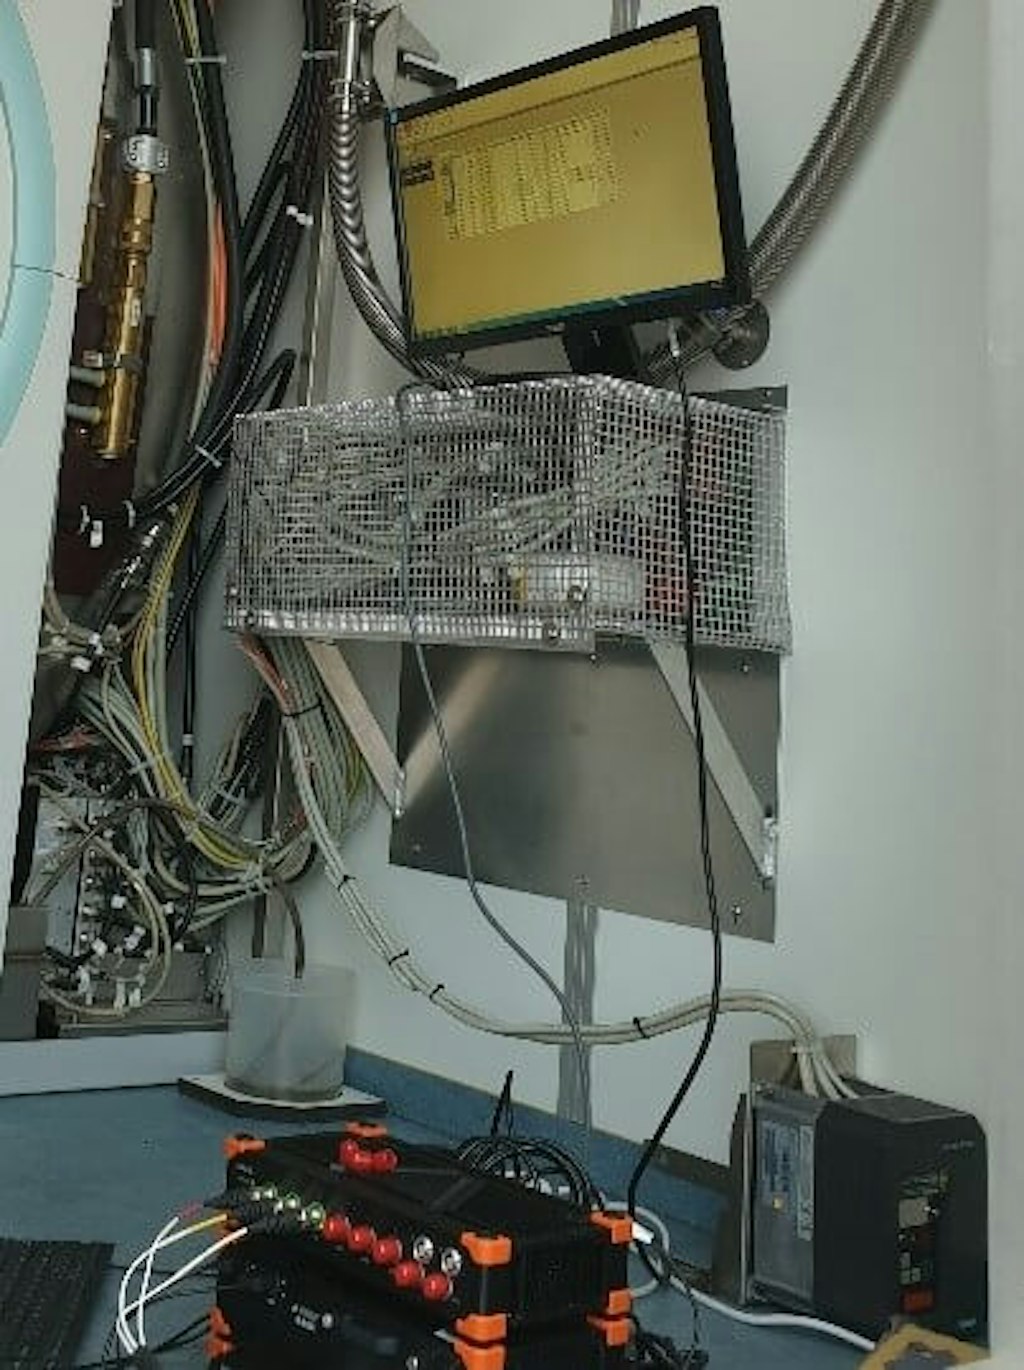 Figure 3. The measurement workstation with an SBOX and two SIRIUS data acquisition systems.